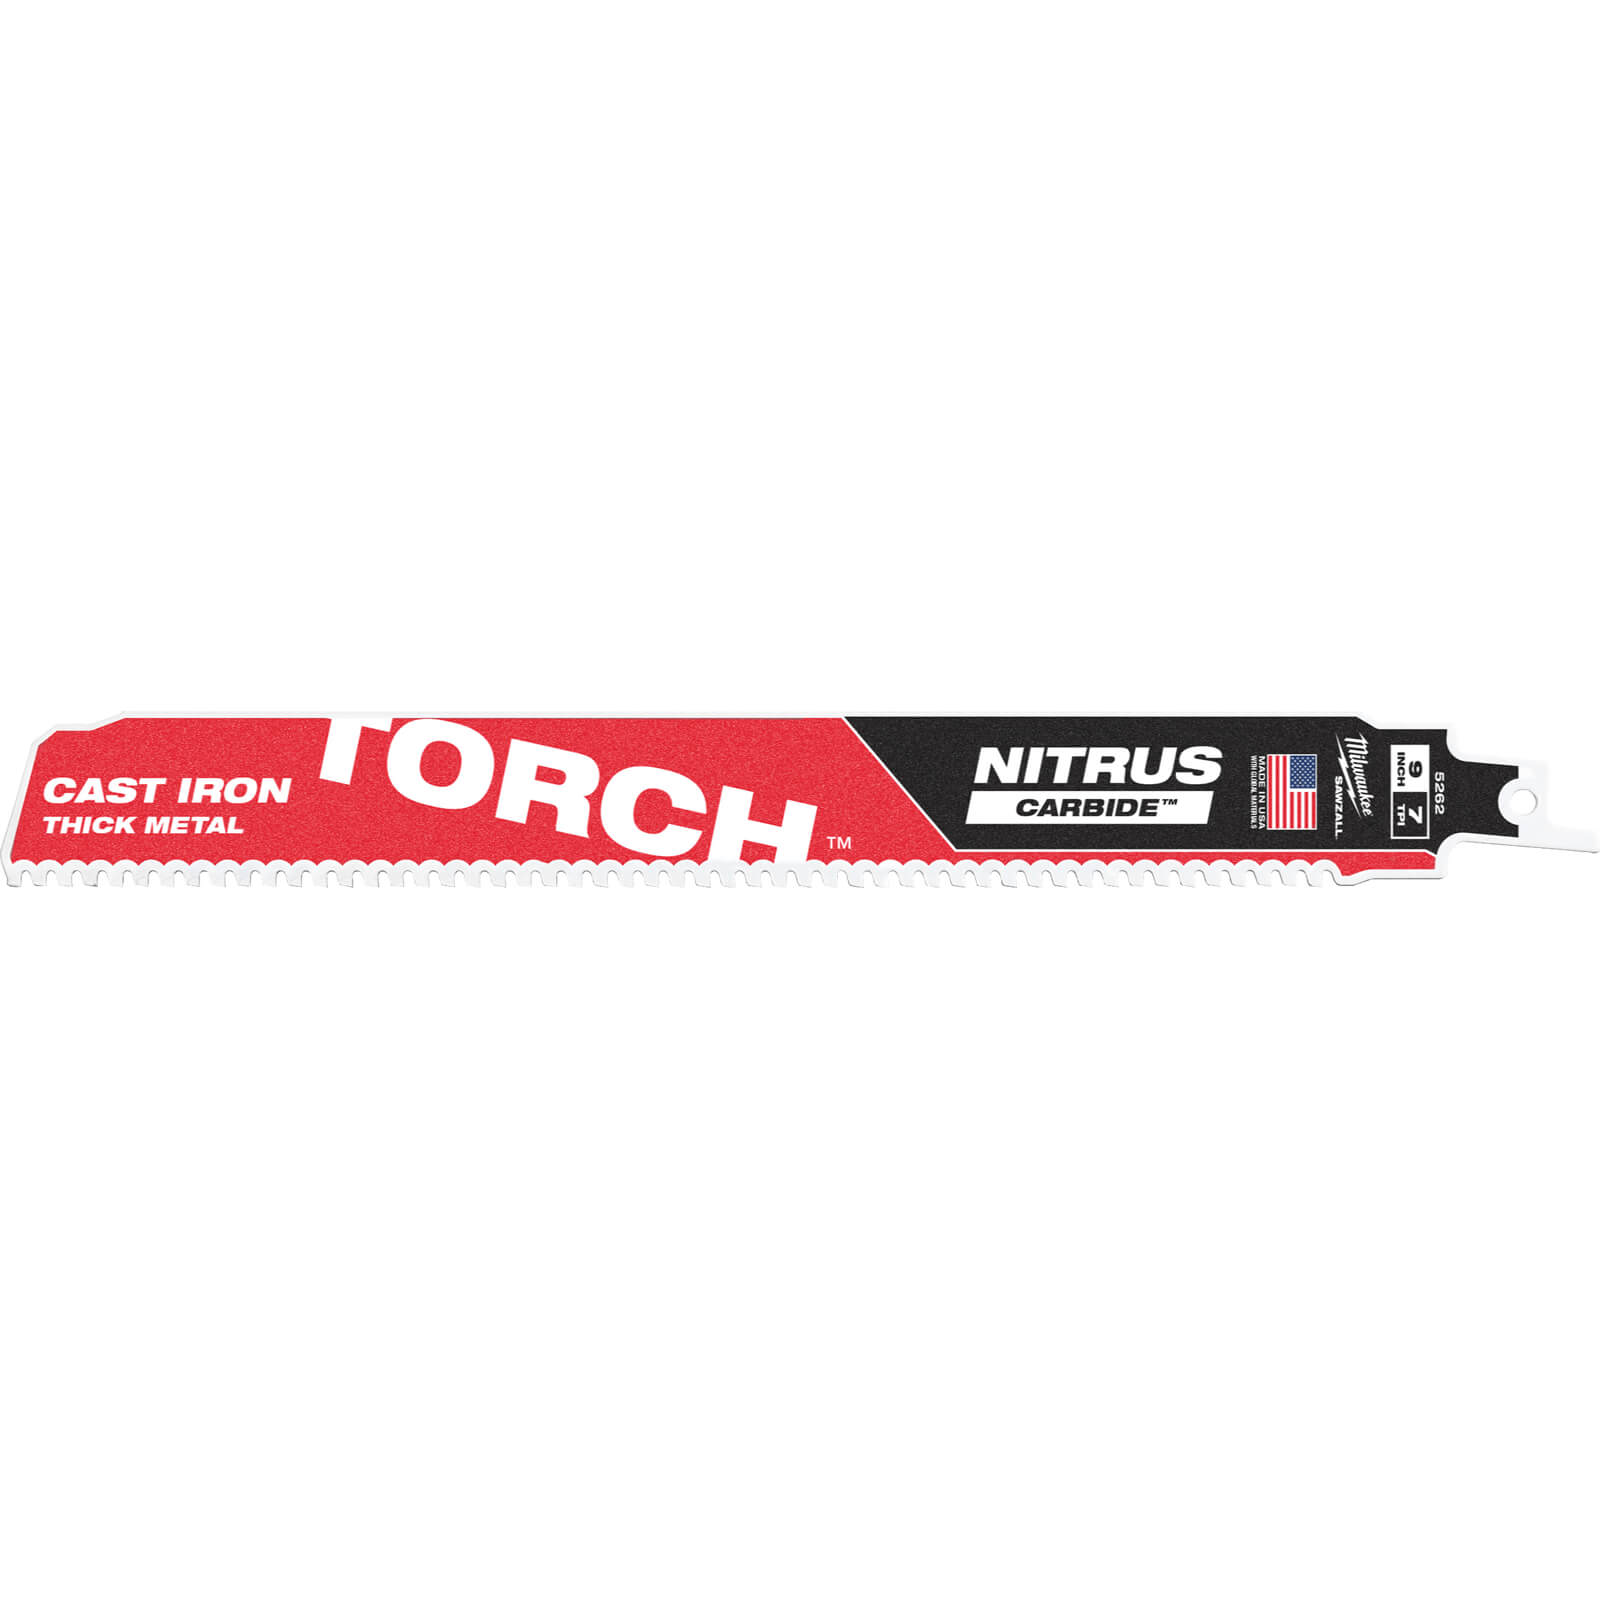 Milwaukee Heavy Duty TORCH Nitrus Carbide Reciprocating Sabre Saw Blades 230mm Pack of 1